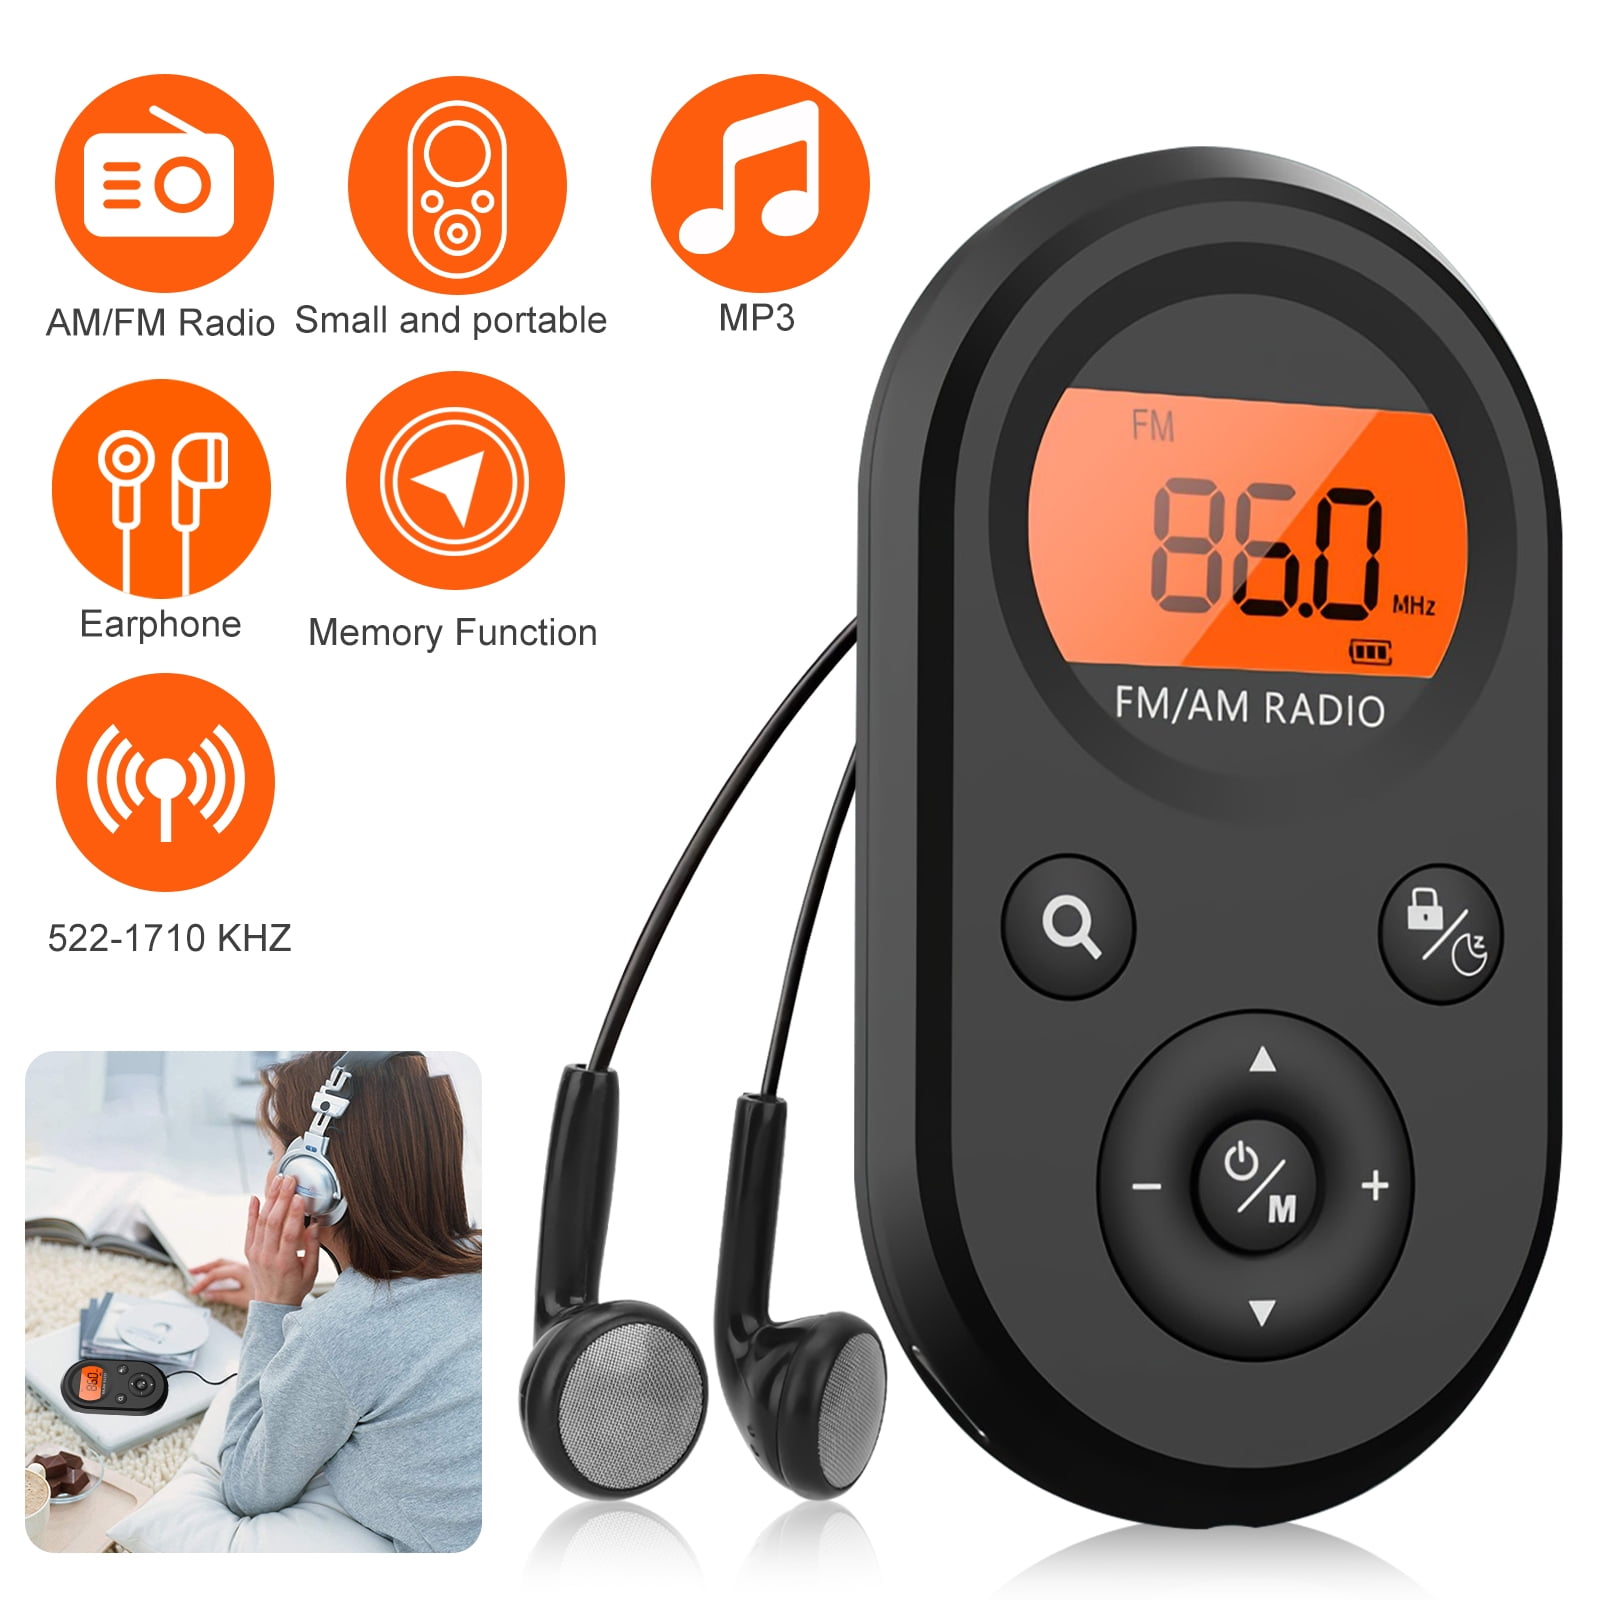 Pocket Retro with Headphone Jack Battery Operated Personal Transistor by 2 AA Battery for Jogging,Walking and Travelling Portable AM/FM Radio Best Reception 